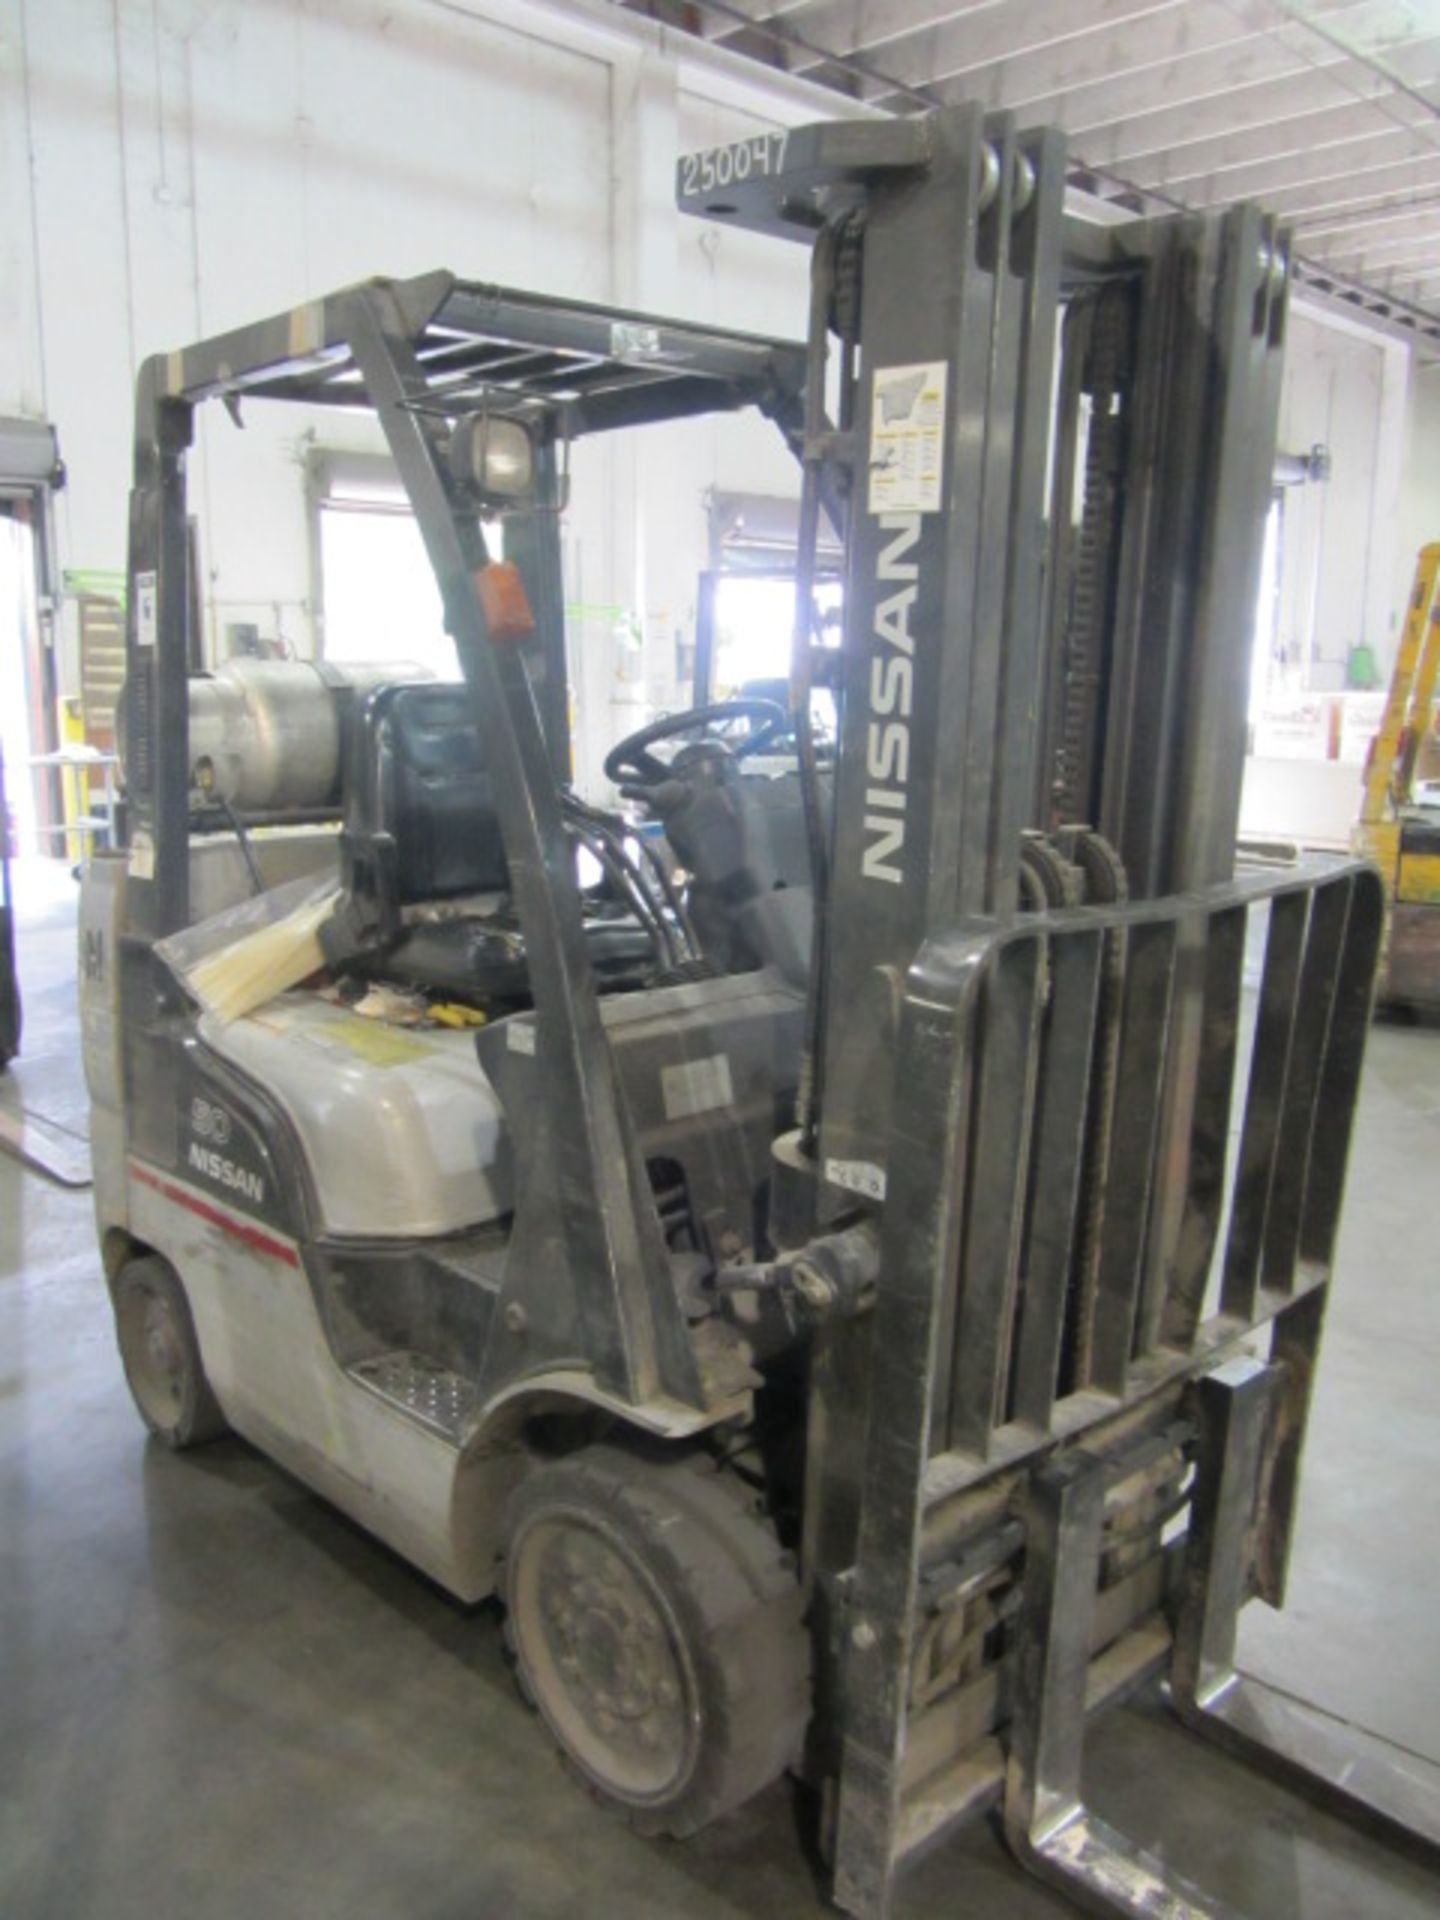 Nissan 50 4400lb Propane Forklift with 3-Stage Mast, Sideshift, sn:CPL02-9P2424 - Image 4 of 7